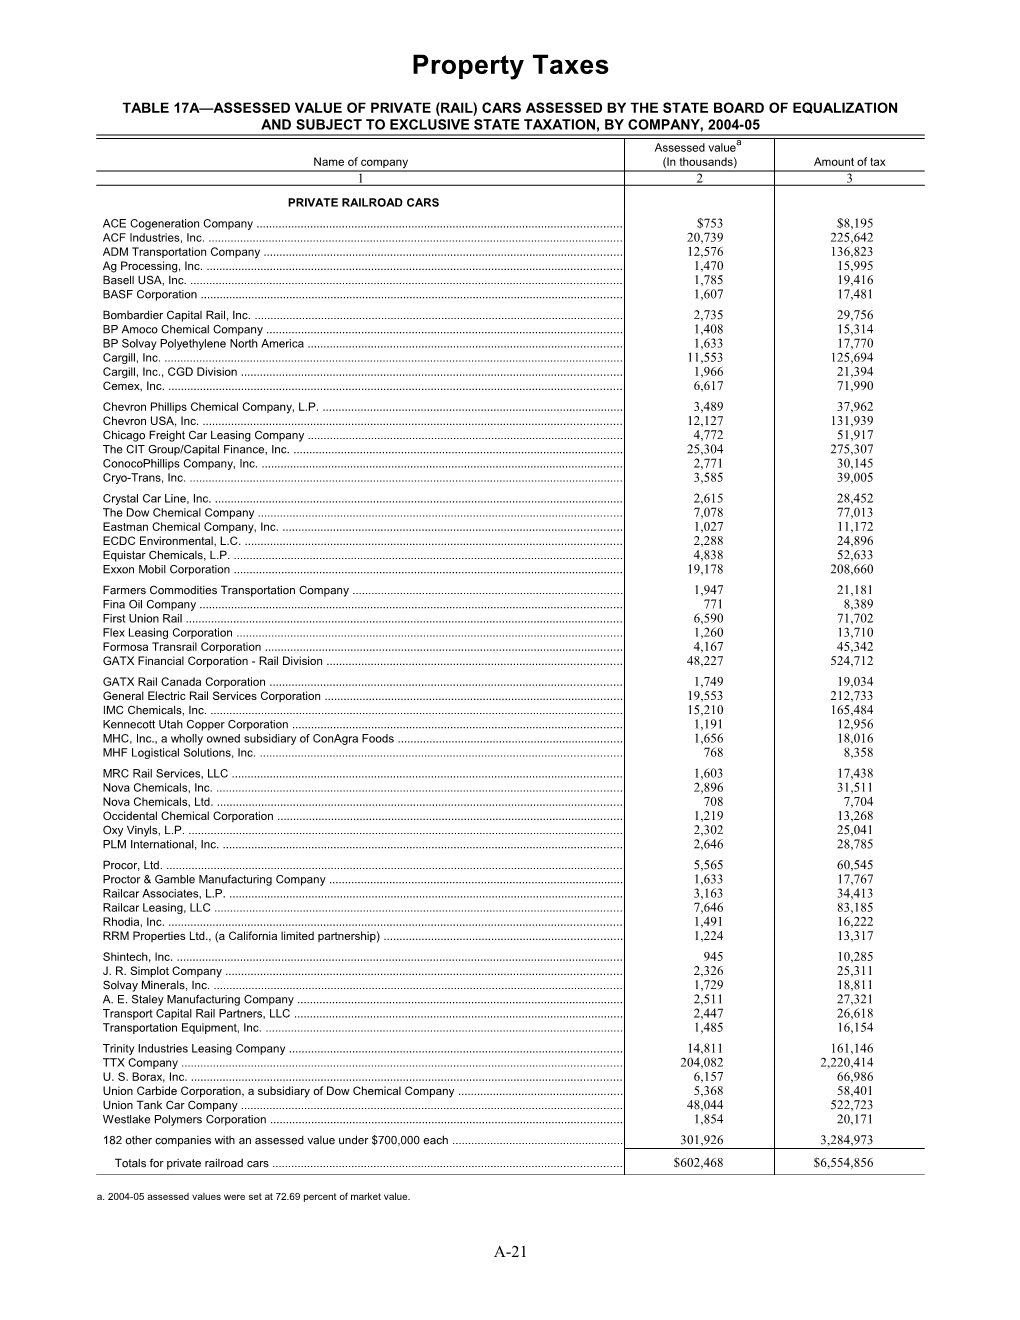 Table 17A Assessed Value of Private (Rail) Cars Assessed by the State Board of Equalization